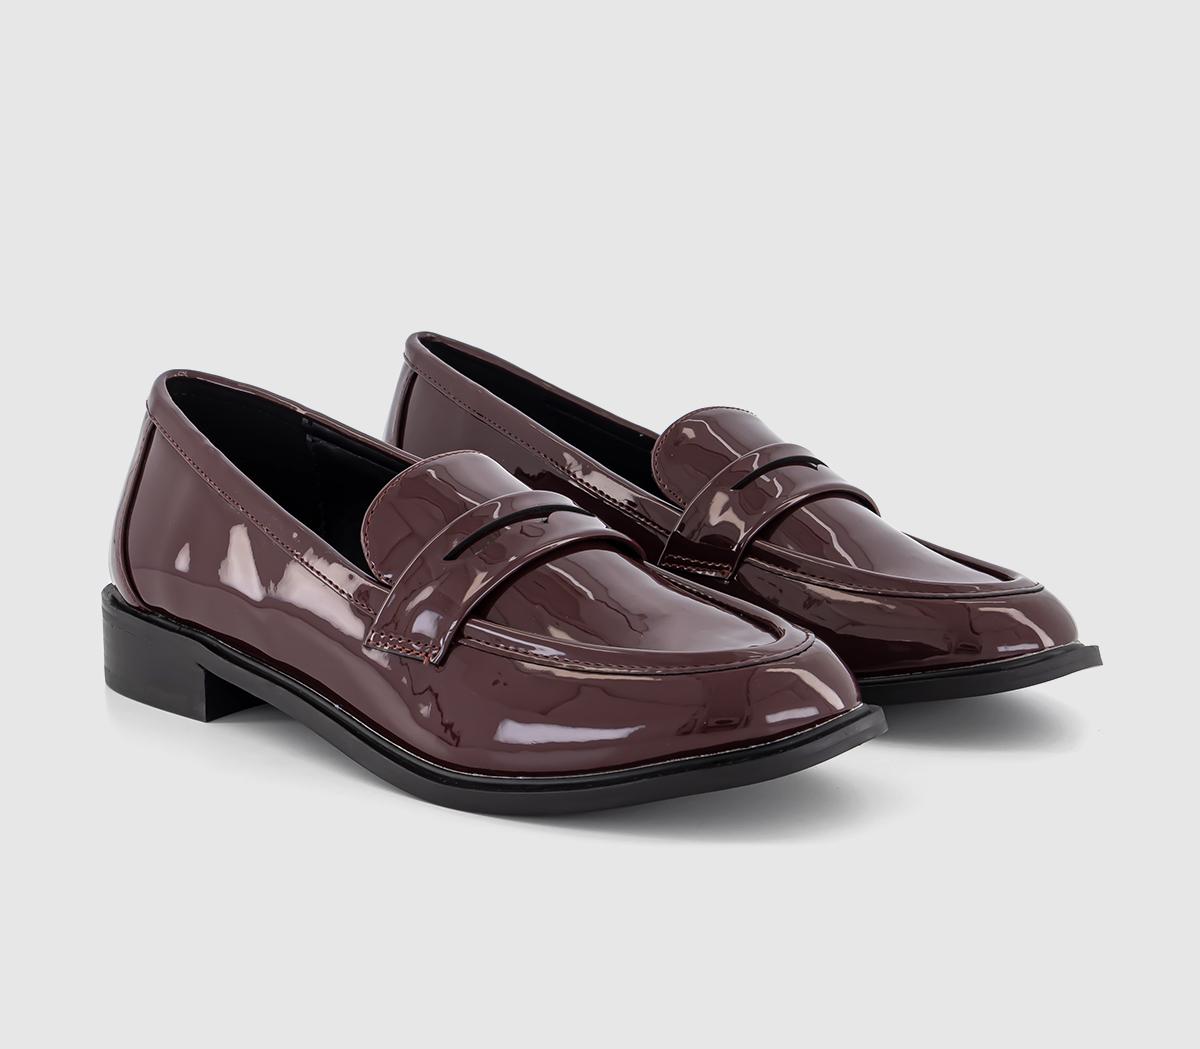 OFFICE Flaming Penny Loafers Burgundy Patent Purple, 6